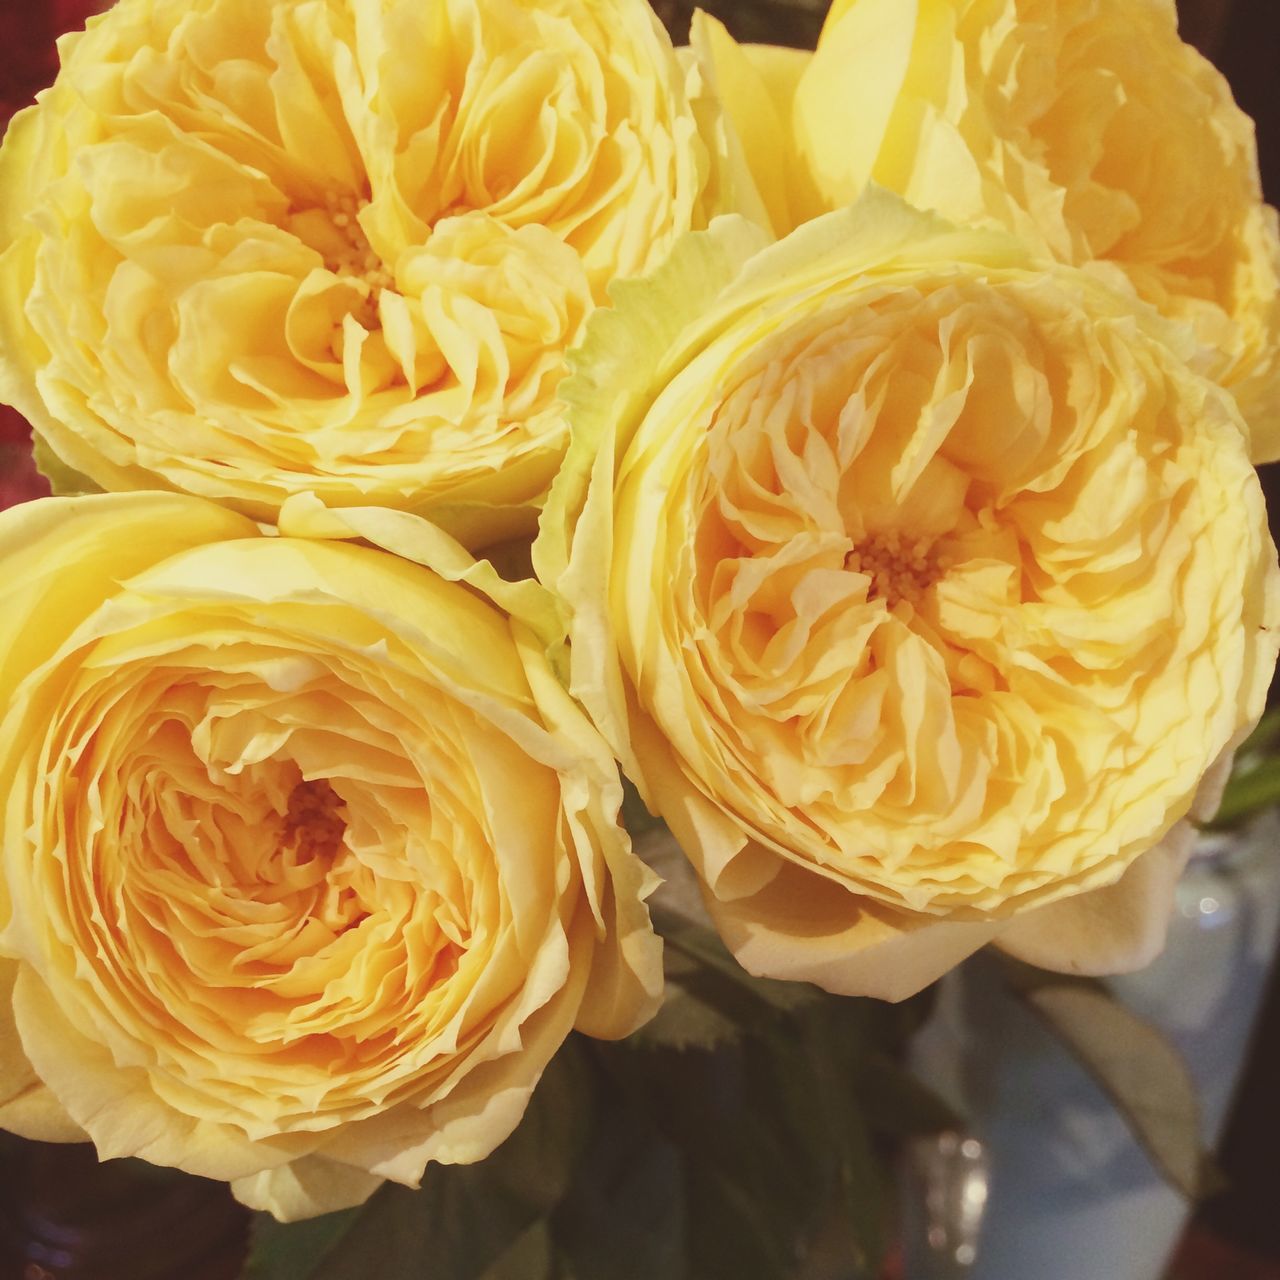 flower, freshness, petal, rose - flower, flower head, indoors, close-up, fragility, yellow, beauty in nature, rose, focus on foreground, no people, orange color, nature, high angle view, blooming, growth, day, still life